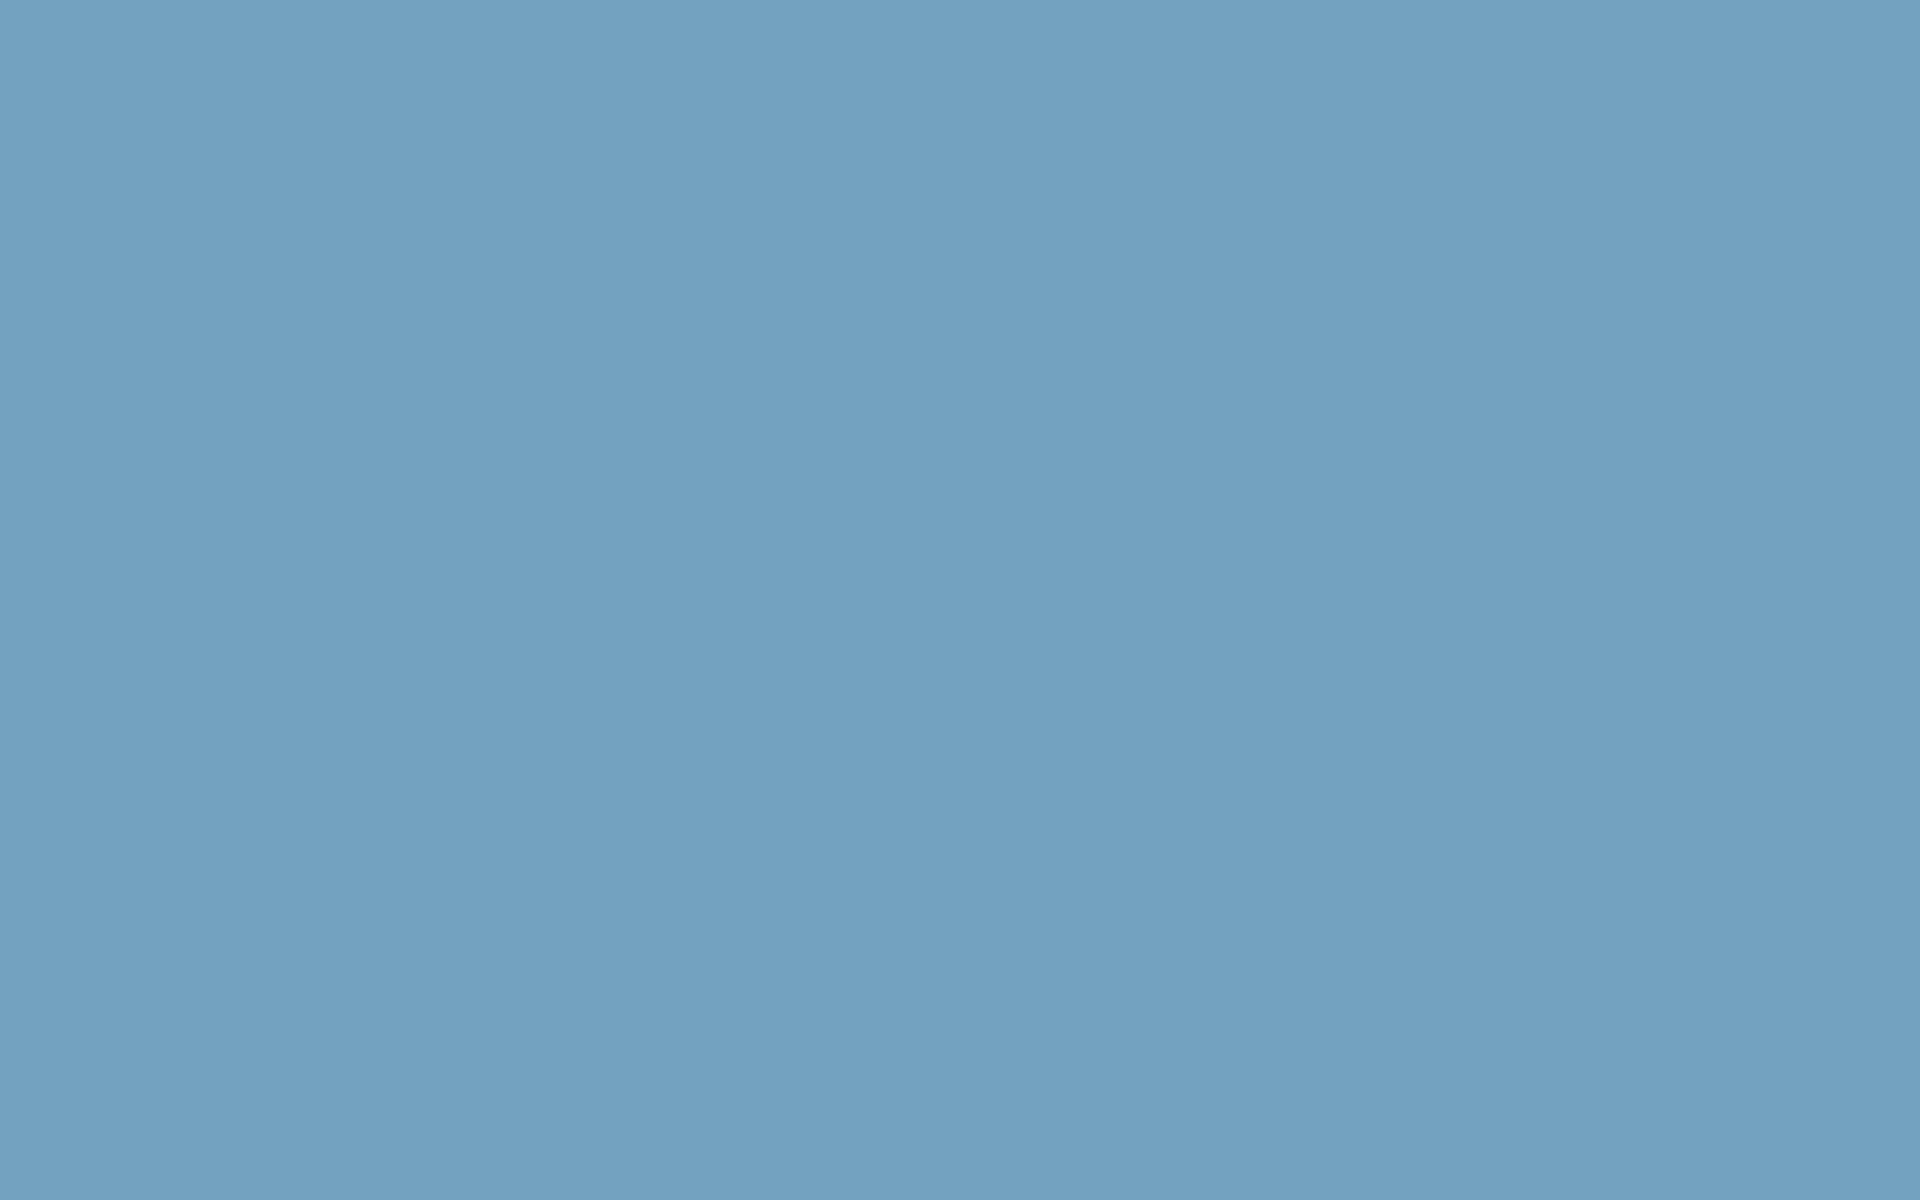 Different Shade Of Plain Blue Background